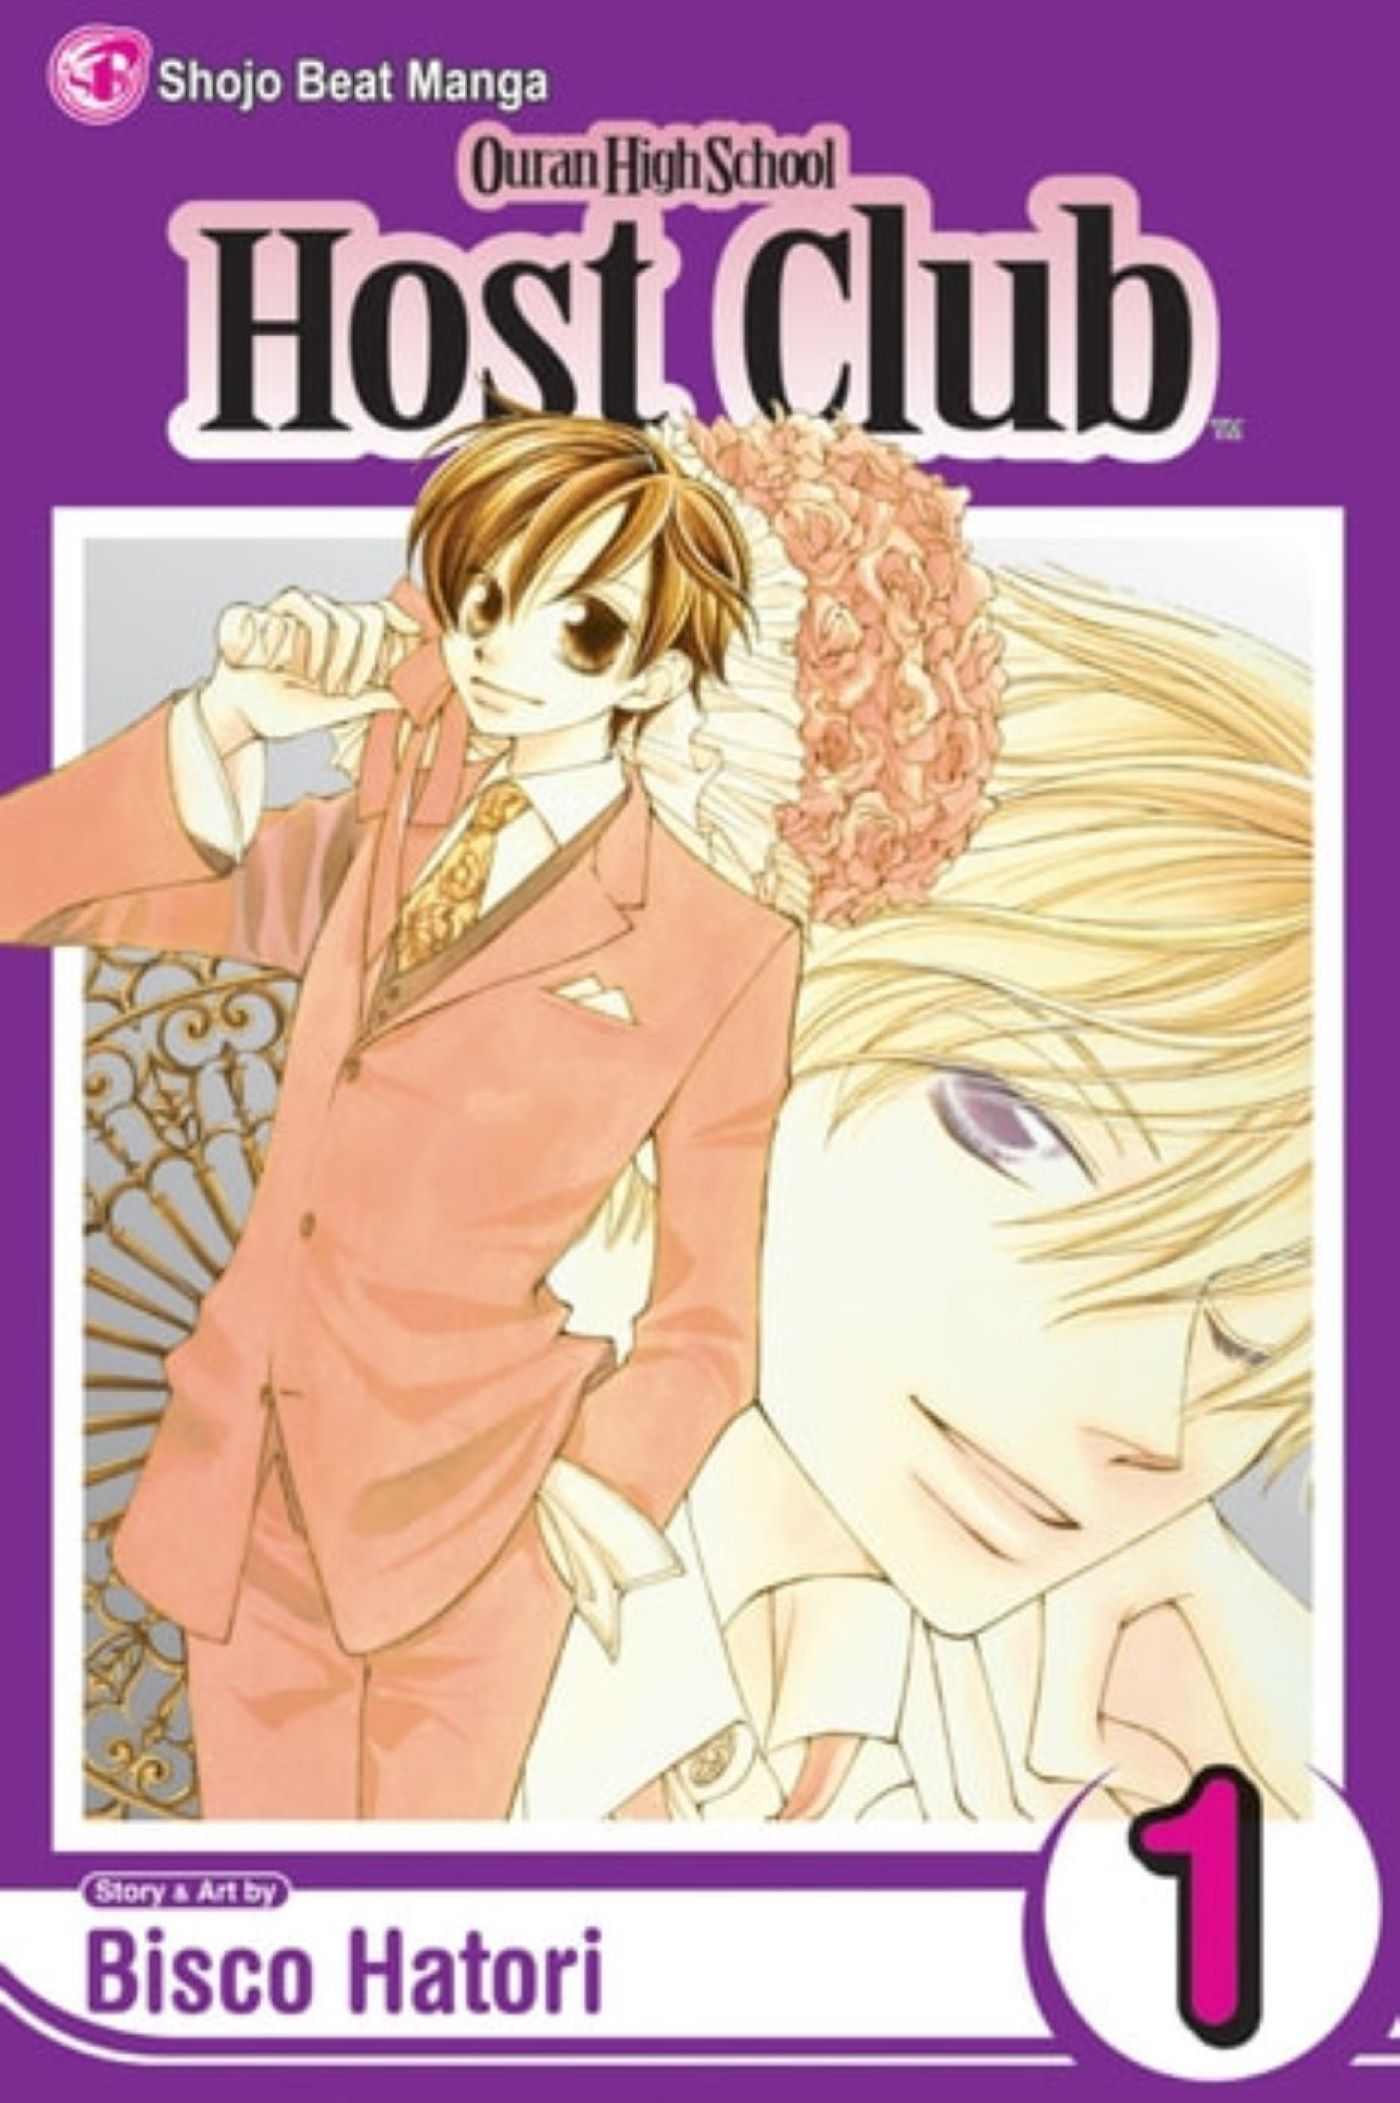 Ouran High School Host Club - Volume 1 - Haruhi with Tamaki's face in background-3